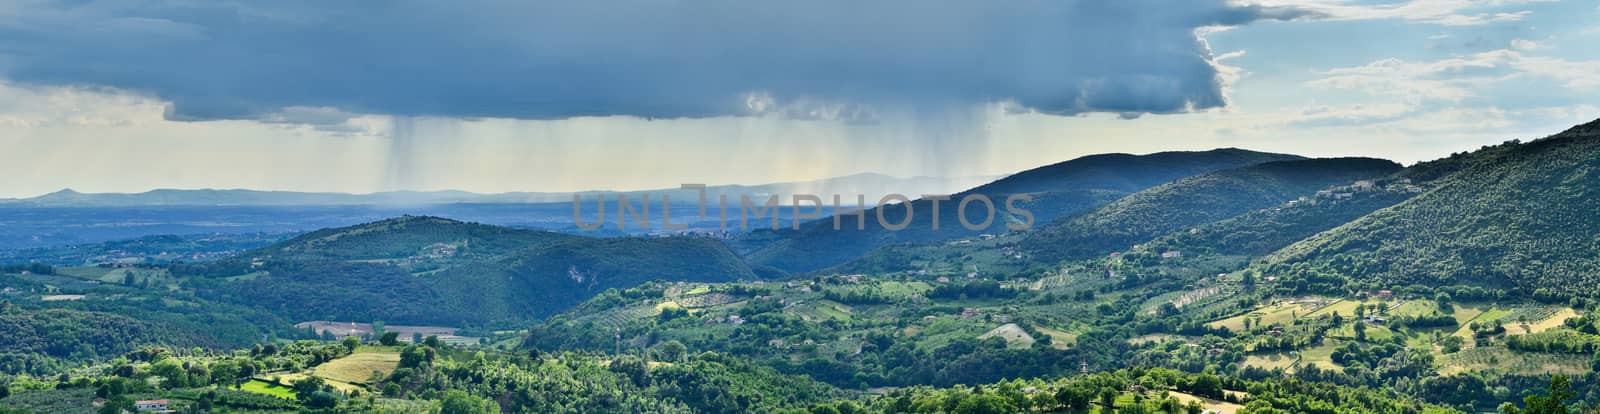 Hills with olive groves, panoramic view over the countryside of Tuscany, Italy